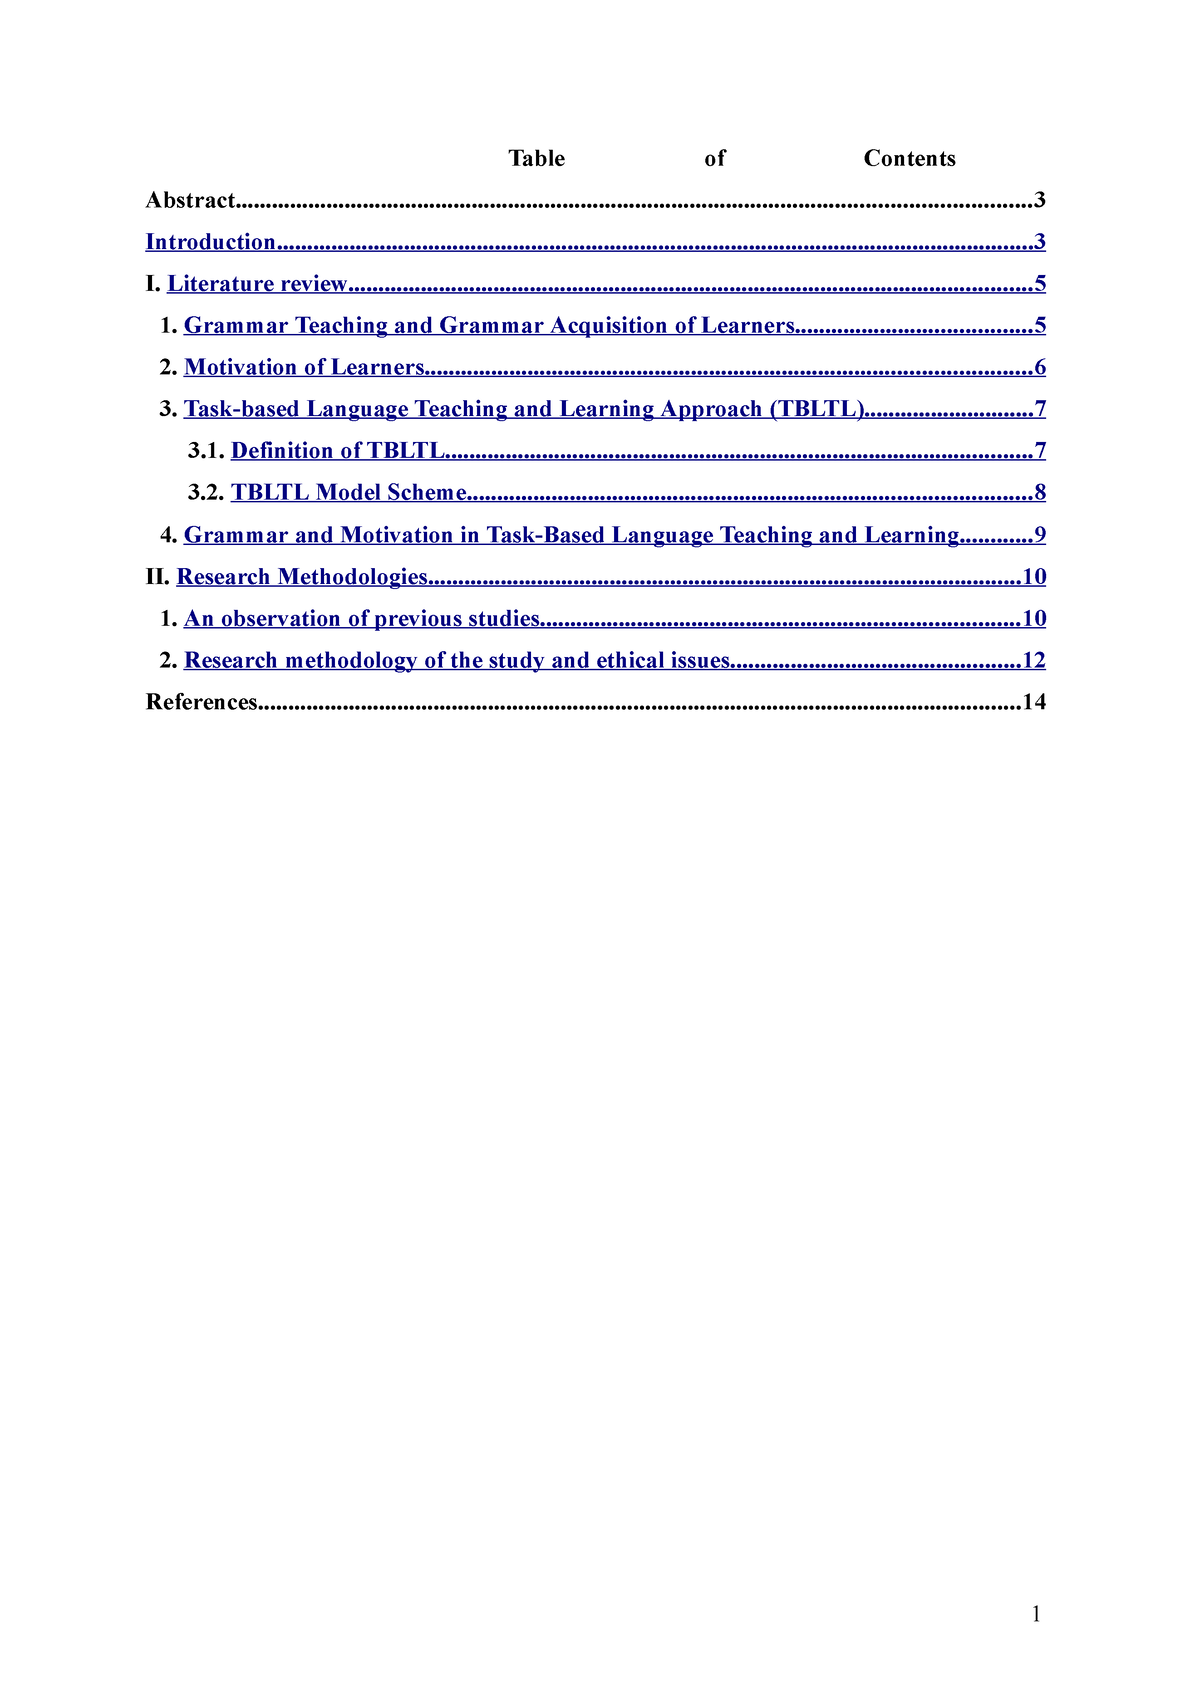 literature review table of contents examples